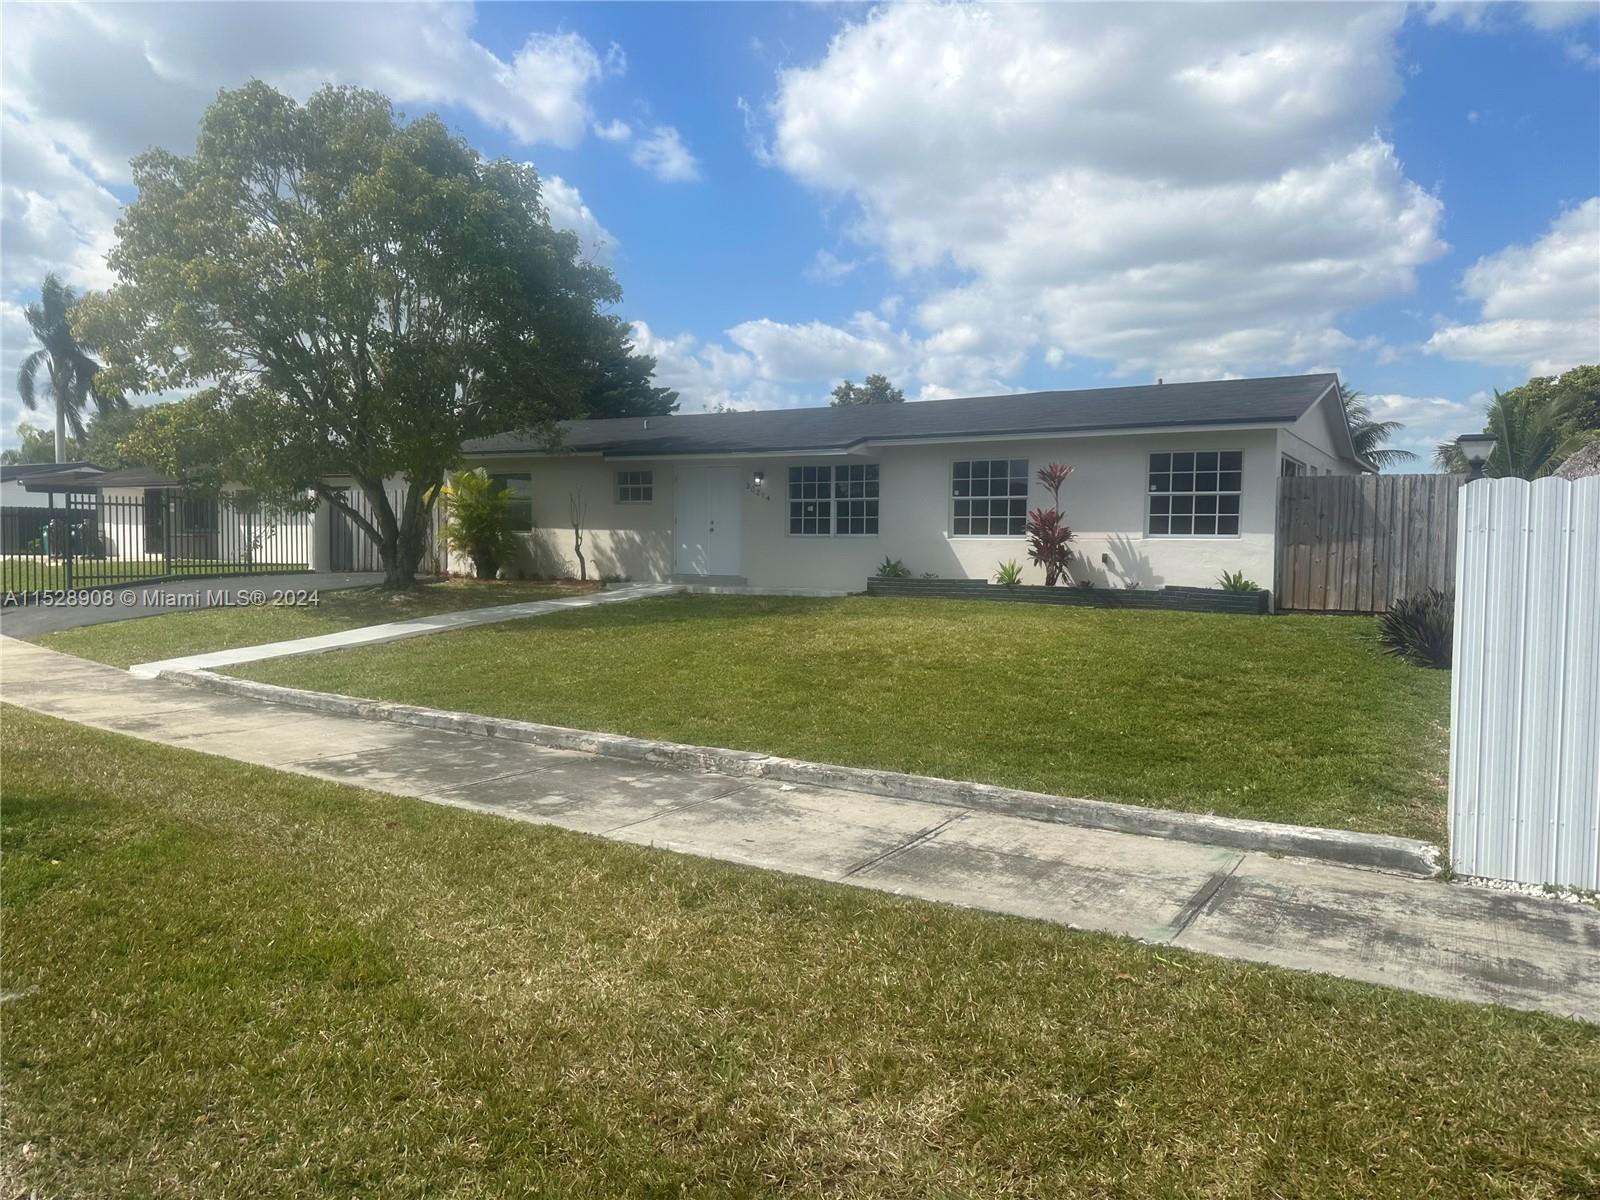 A beautiful fully remodeled 4/2 single family home. It boasts a brand new kitchen with quarts countertop, new elegant bathrooms, tile throughout, big laundry area,  and a new roof done with permit. This house has one of the bigger lots in the neighborhood with a patio that is great for entertaining. Just hurry and bring your toothbrush! no HoA. Please see attachment